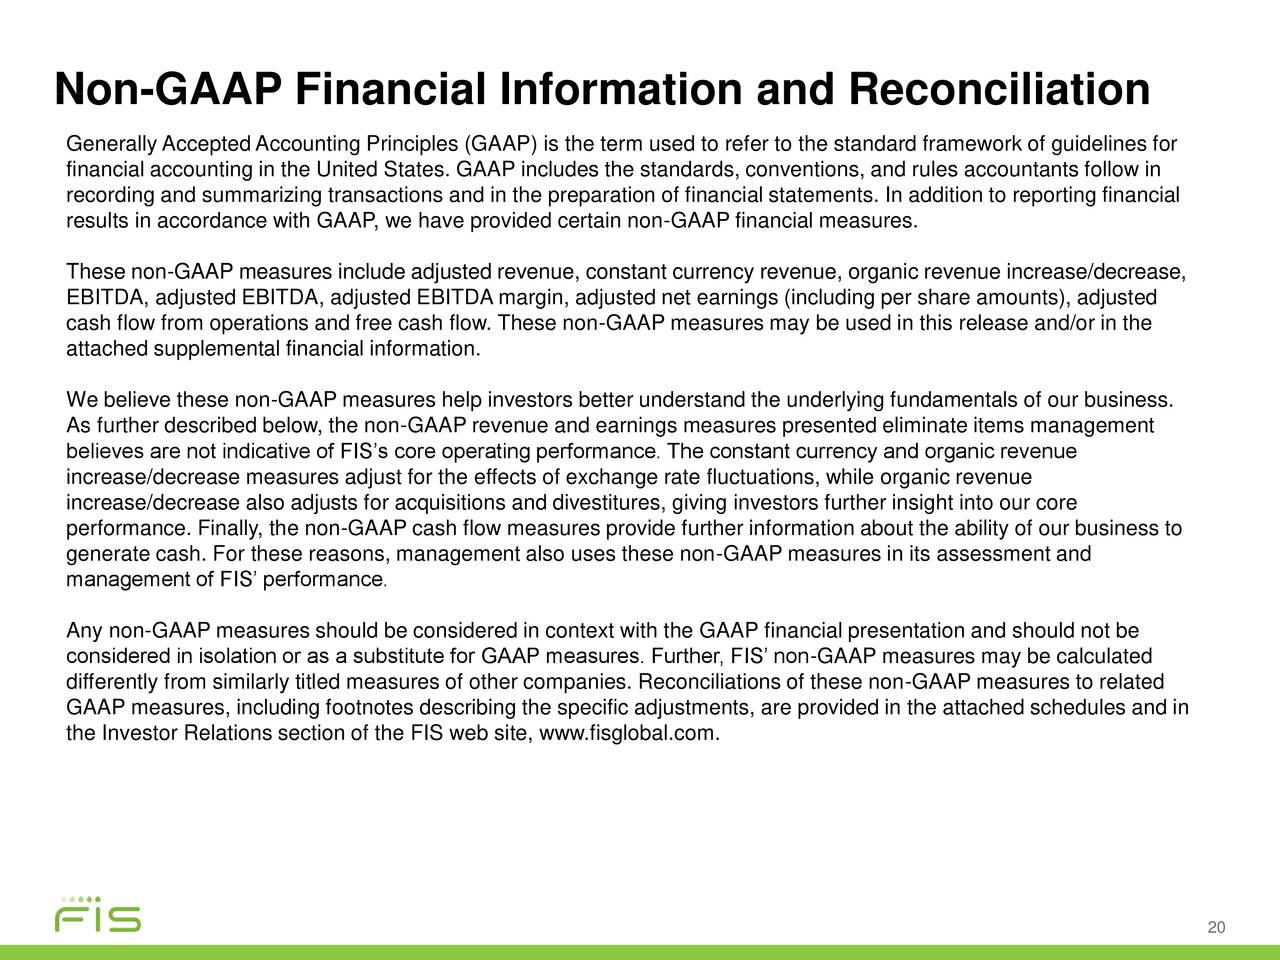 Non-GAAP Financial Information and Reconciliation